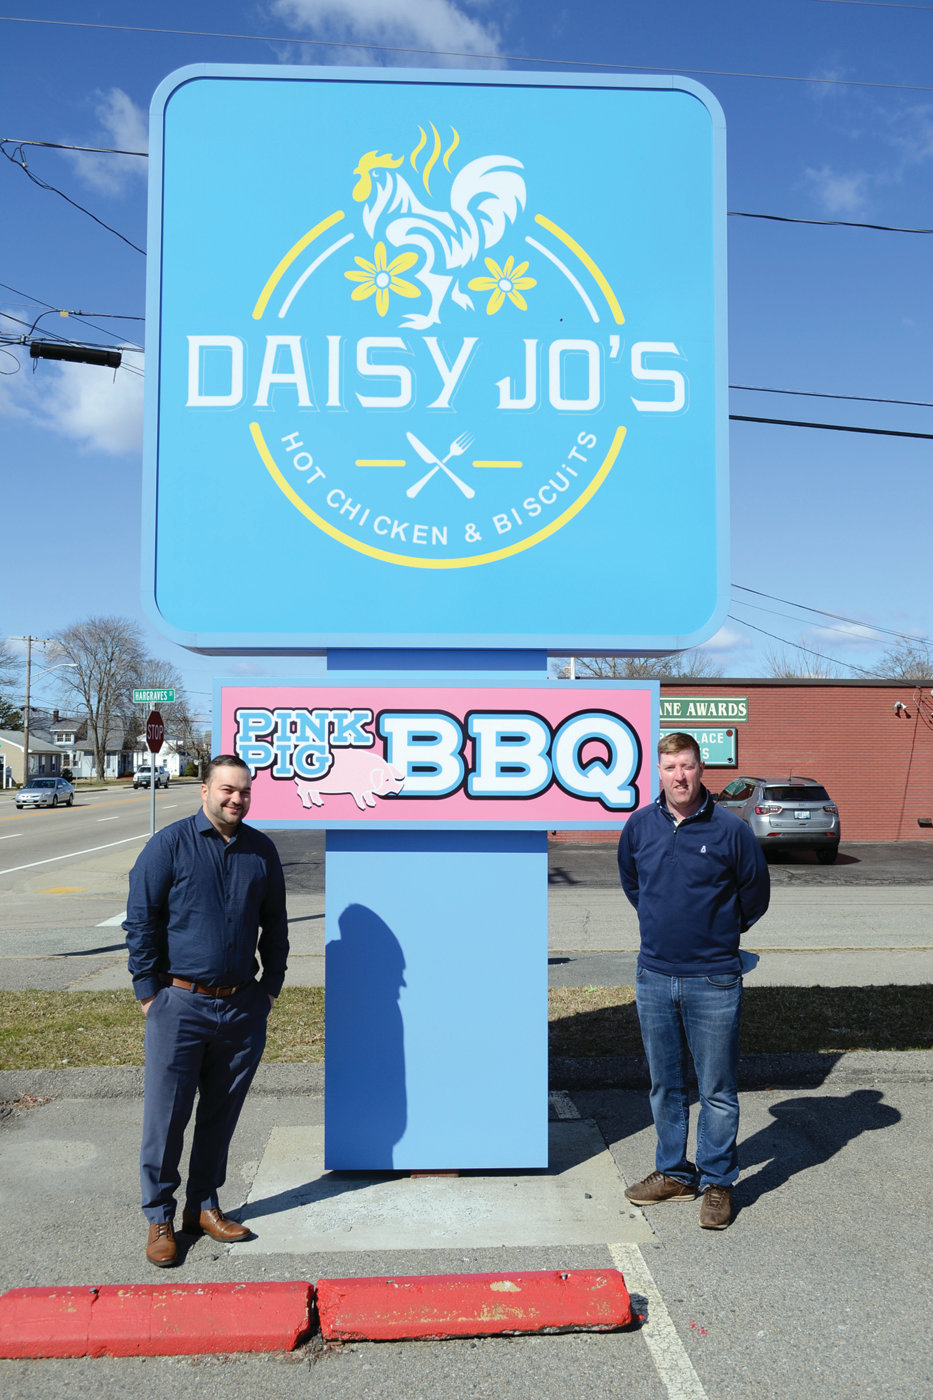 SIGN OF THINGS TO COME: The Pink Pig BBQ sign will soon be gone, but the Daisy Jo’s sign will hopefully bring in lots of hungry, curious diners to the new Daisy Jo’s, opening this month within a couple weeks, according to co-owners Ed Brady and Jeff Quinlan.